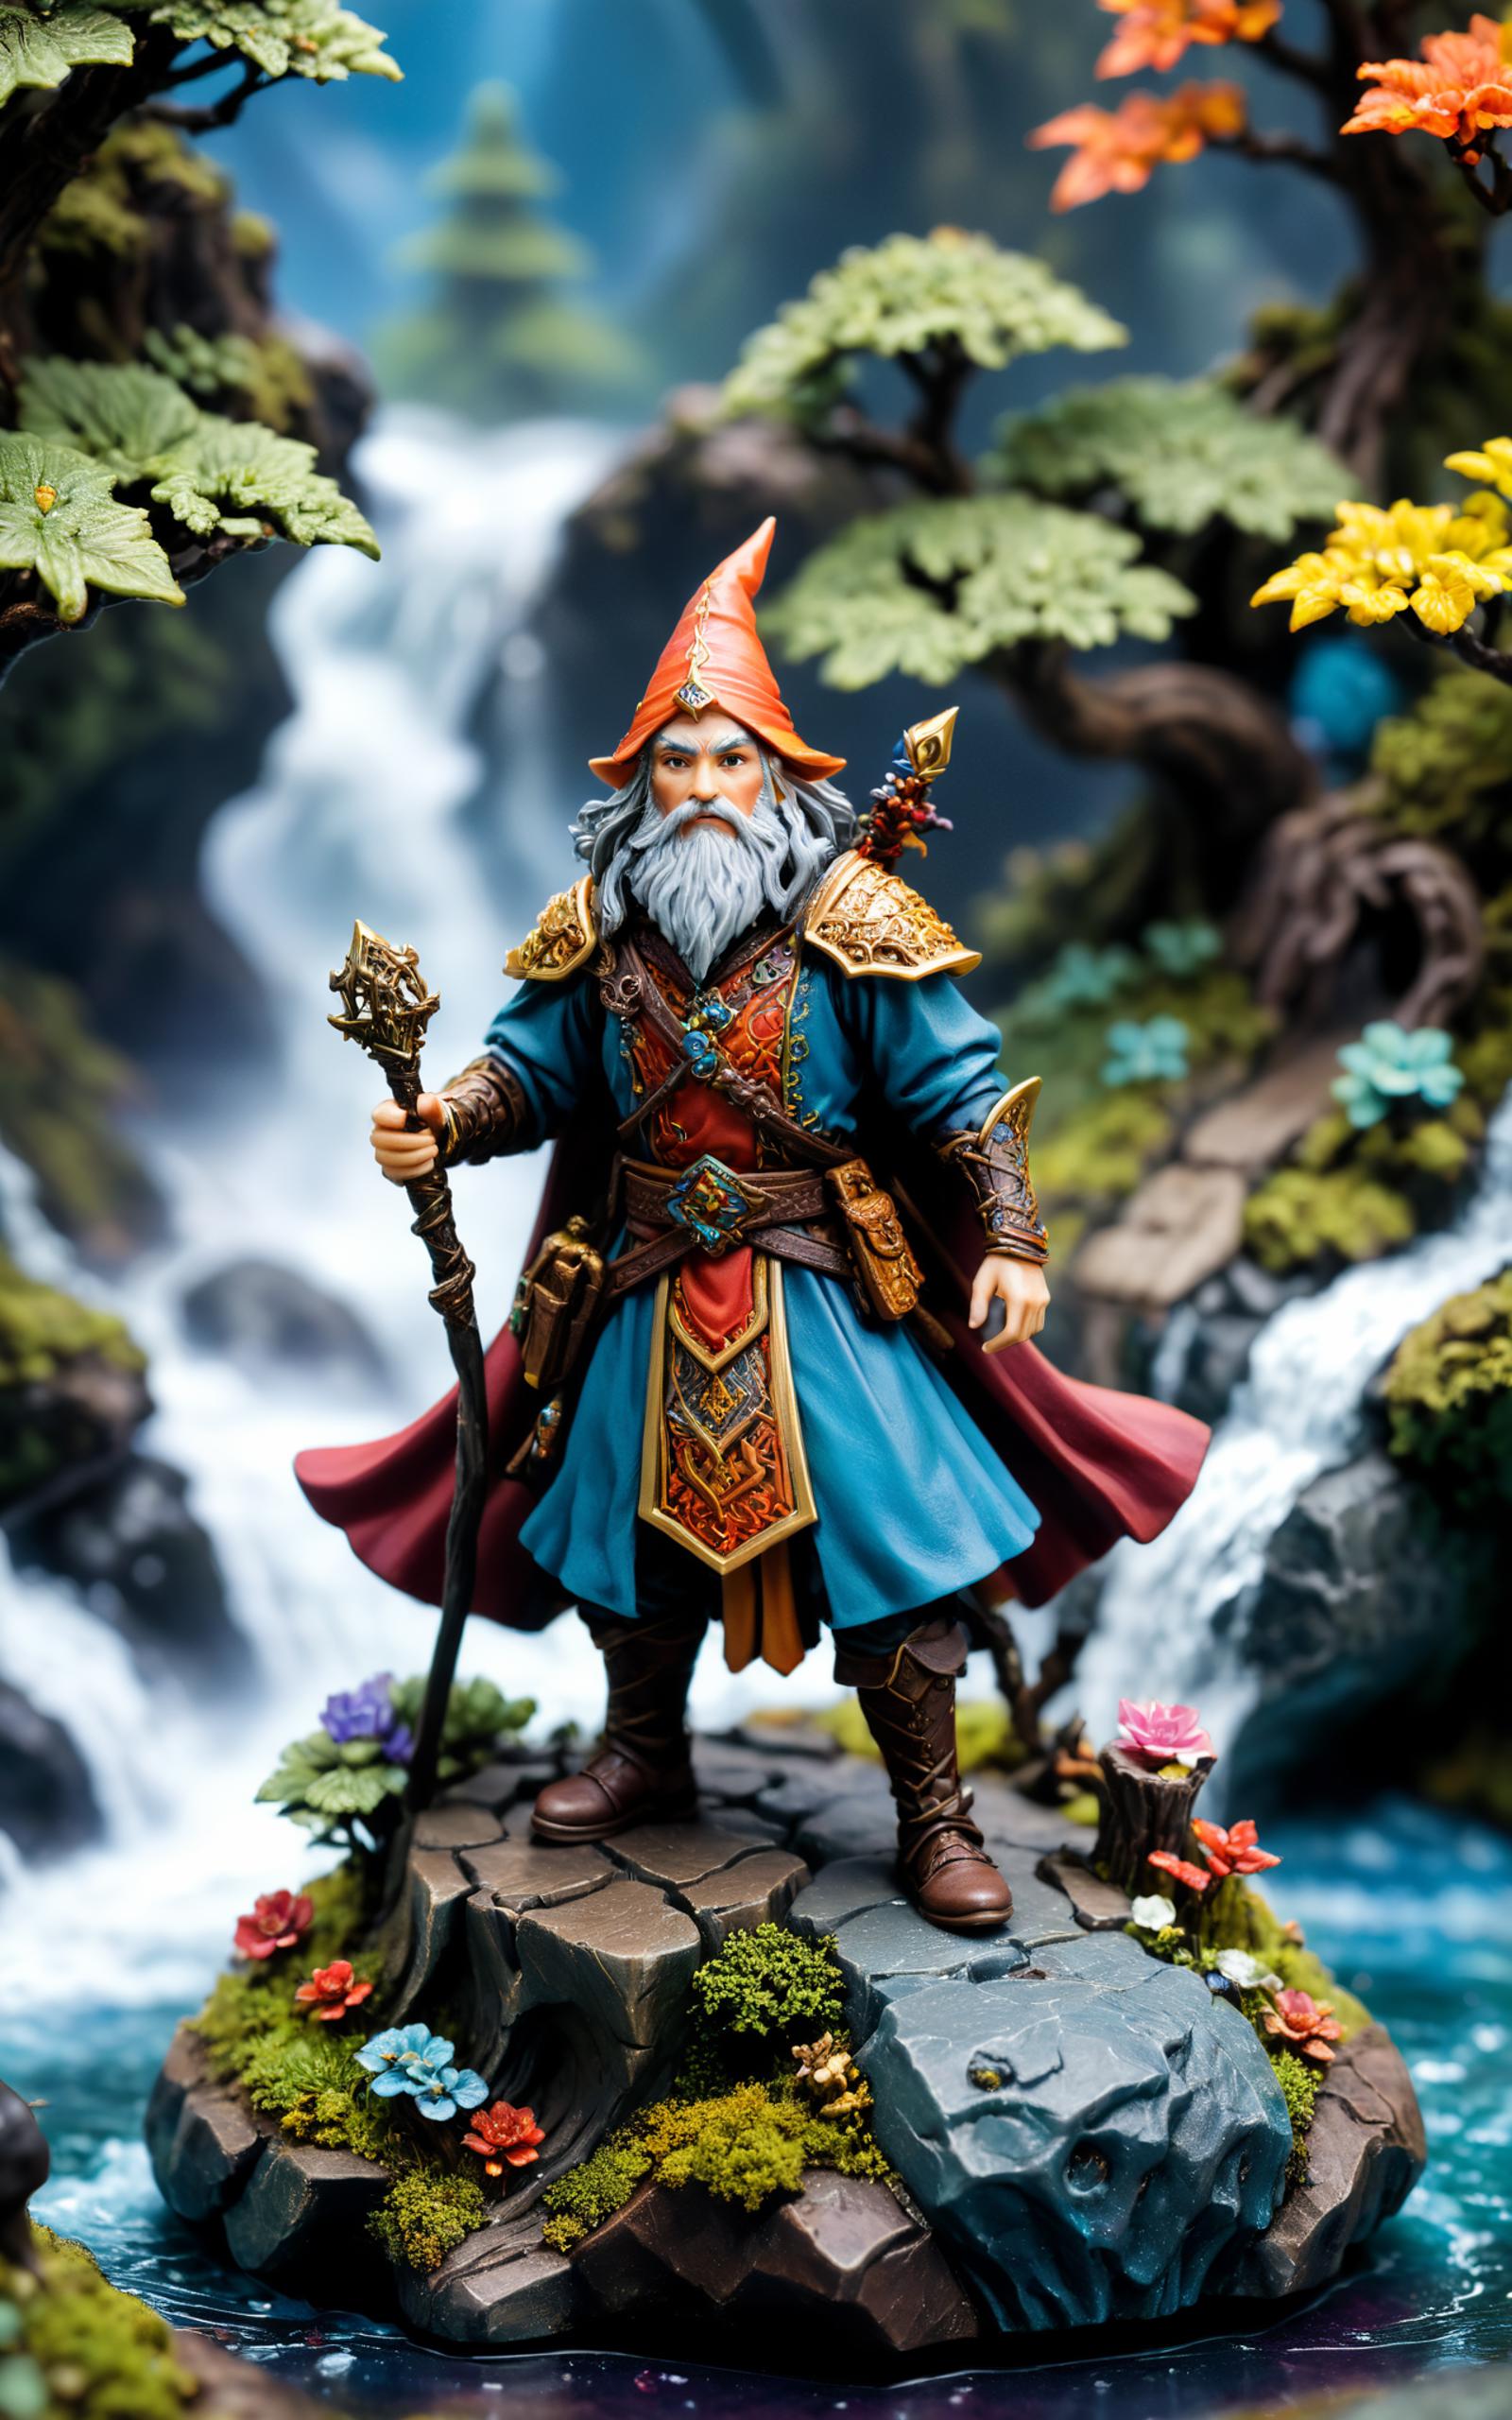 A figure of a wizard with a blue and red robe holding a staff and wand.